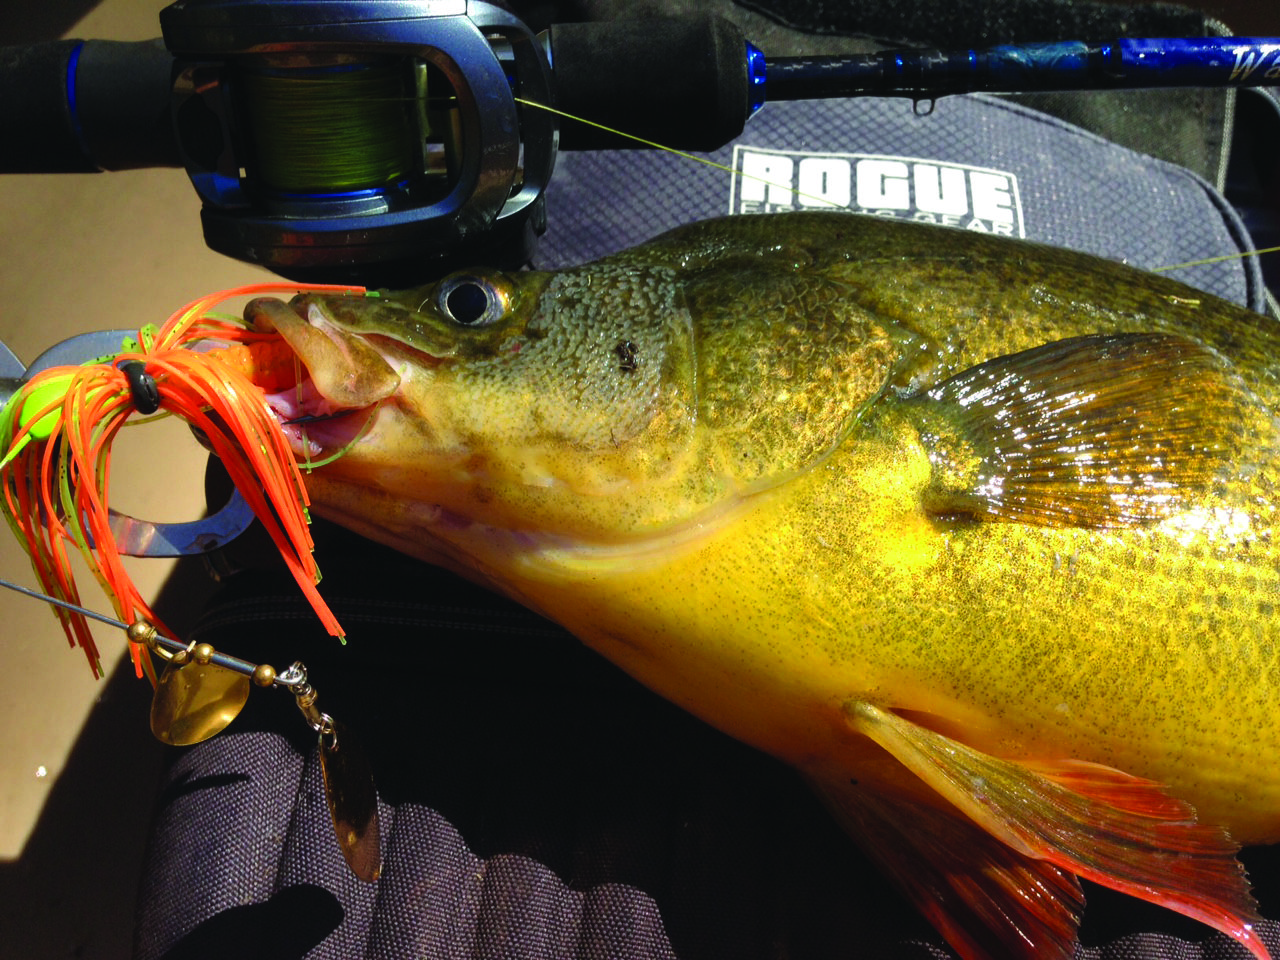 Check out the intense colours on this golden that took a spinnerbait in half a metre of water.